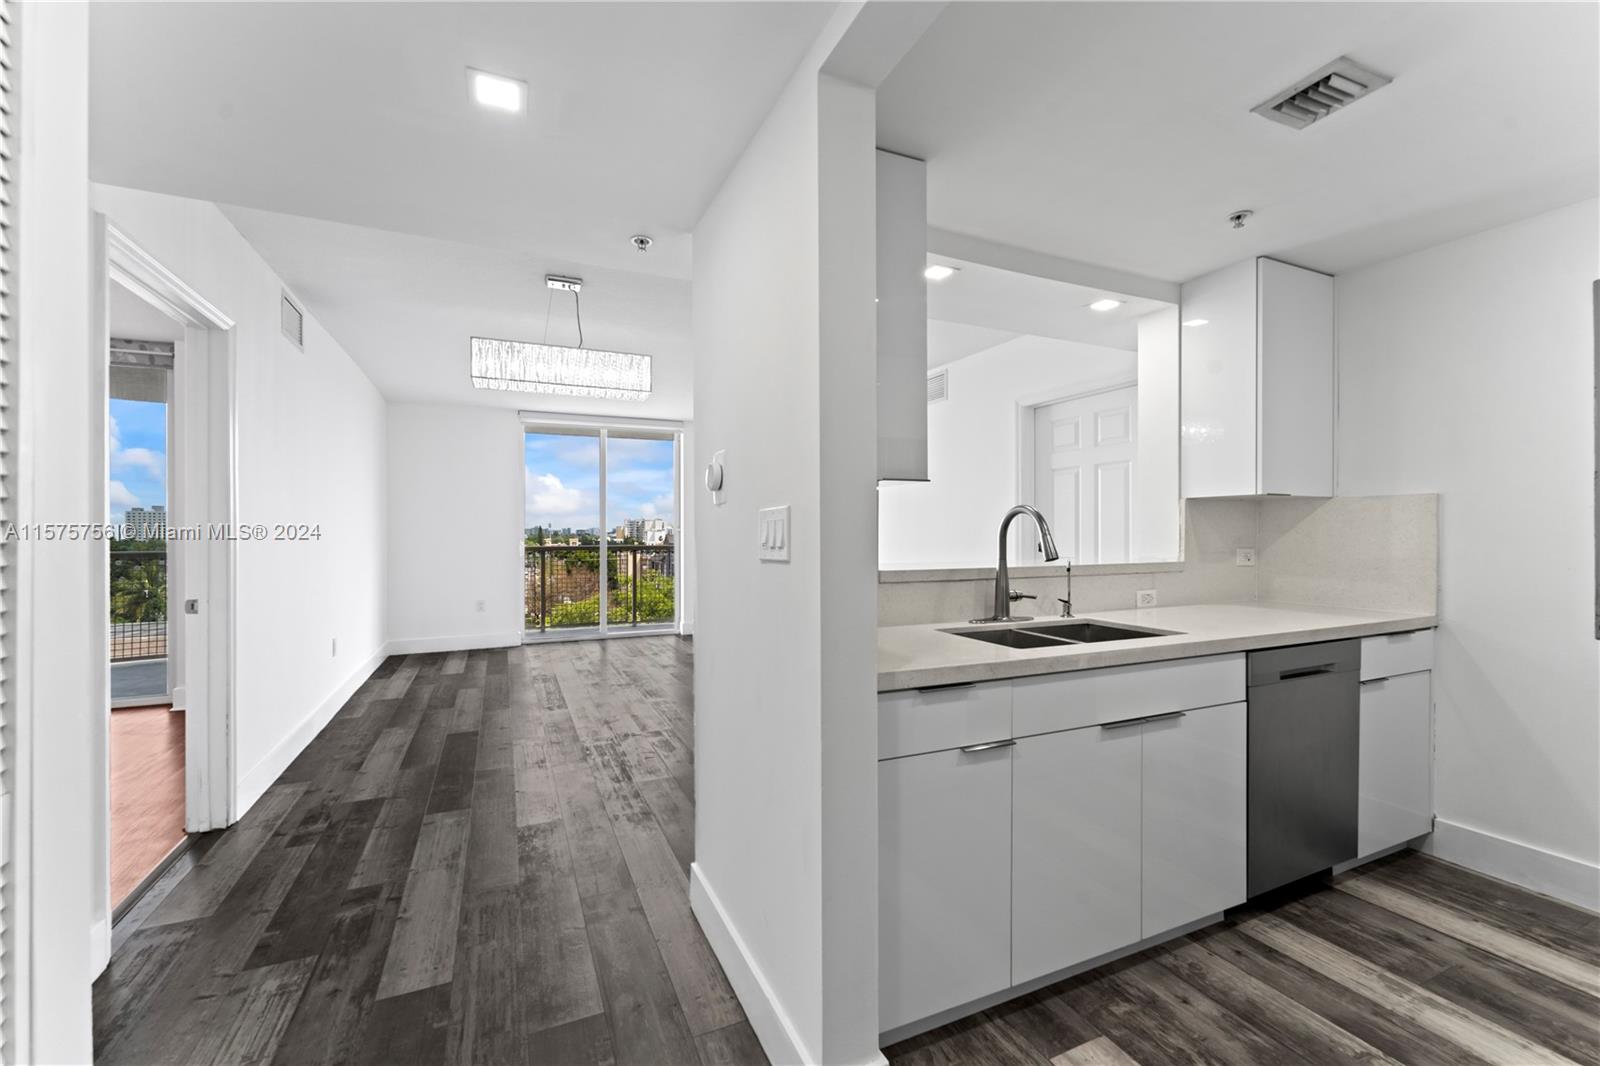 Welcome a chic condo nestled in the heart of Miami offers a beautifully remodeled kitchen, With spacious 2 bedrooms and 2 baths, this unit combines comfort and style seamlessly. Don't miss out on the opportunity to experience the vibrant lifestyle of Miami from this centrally located gem!